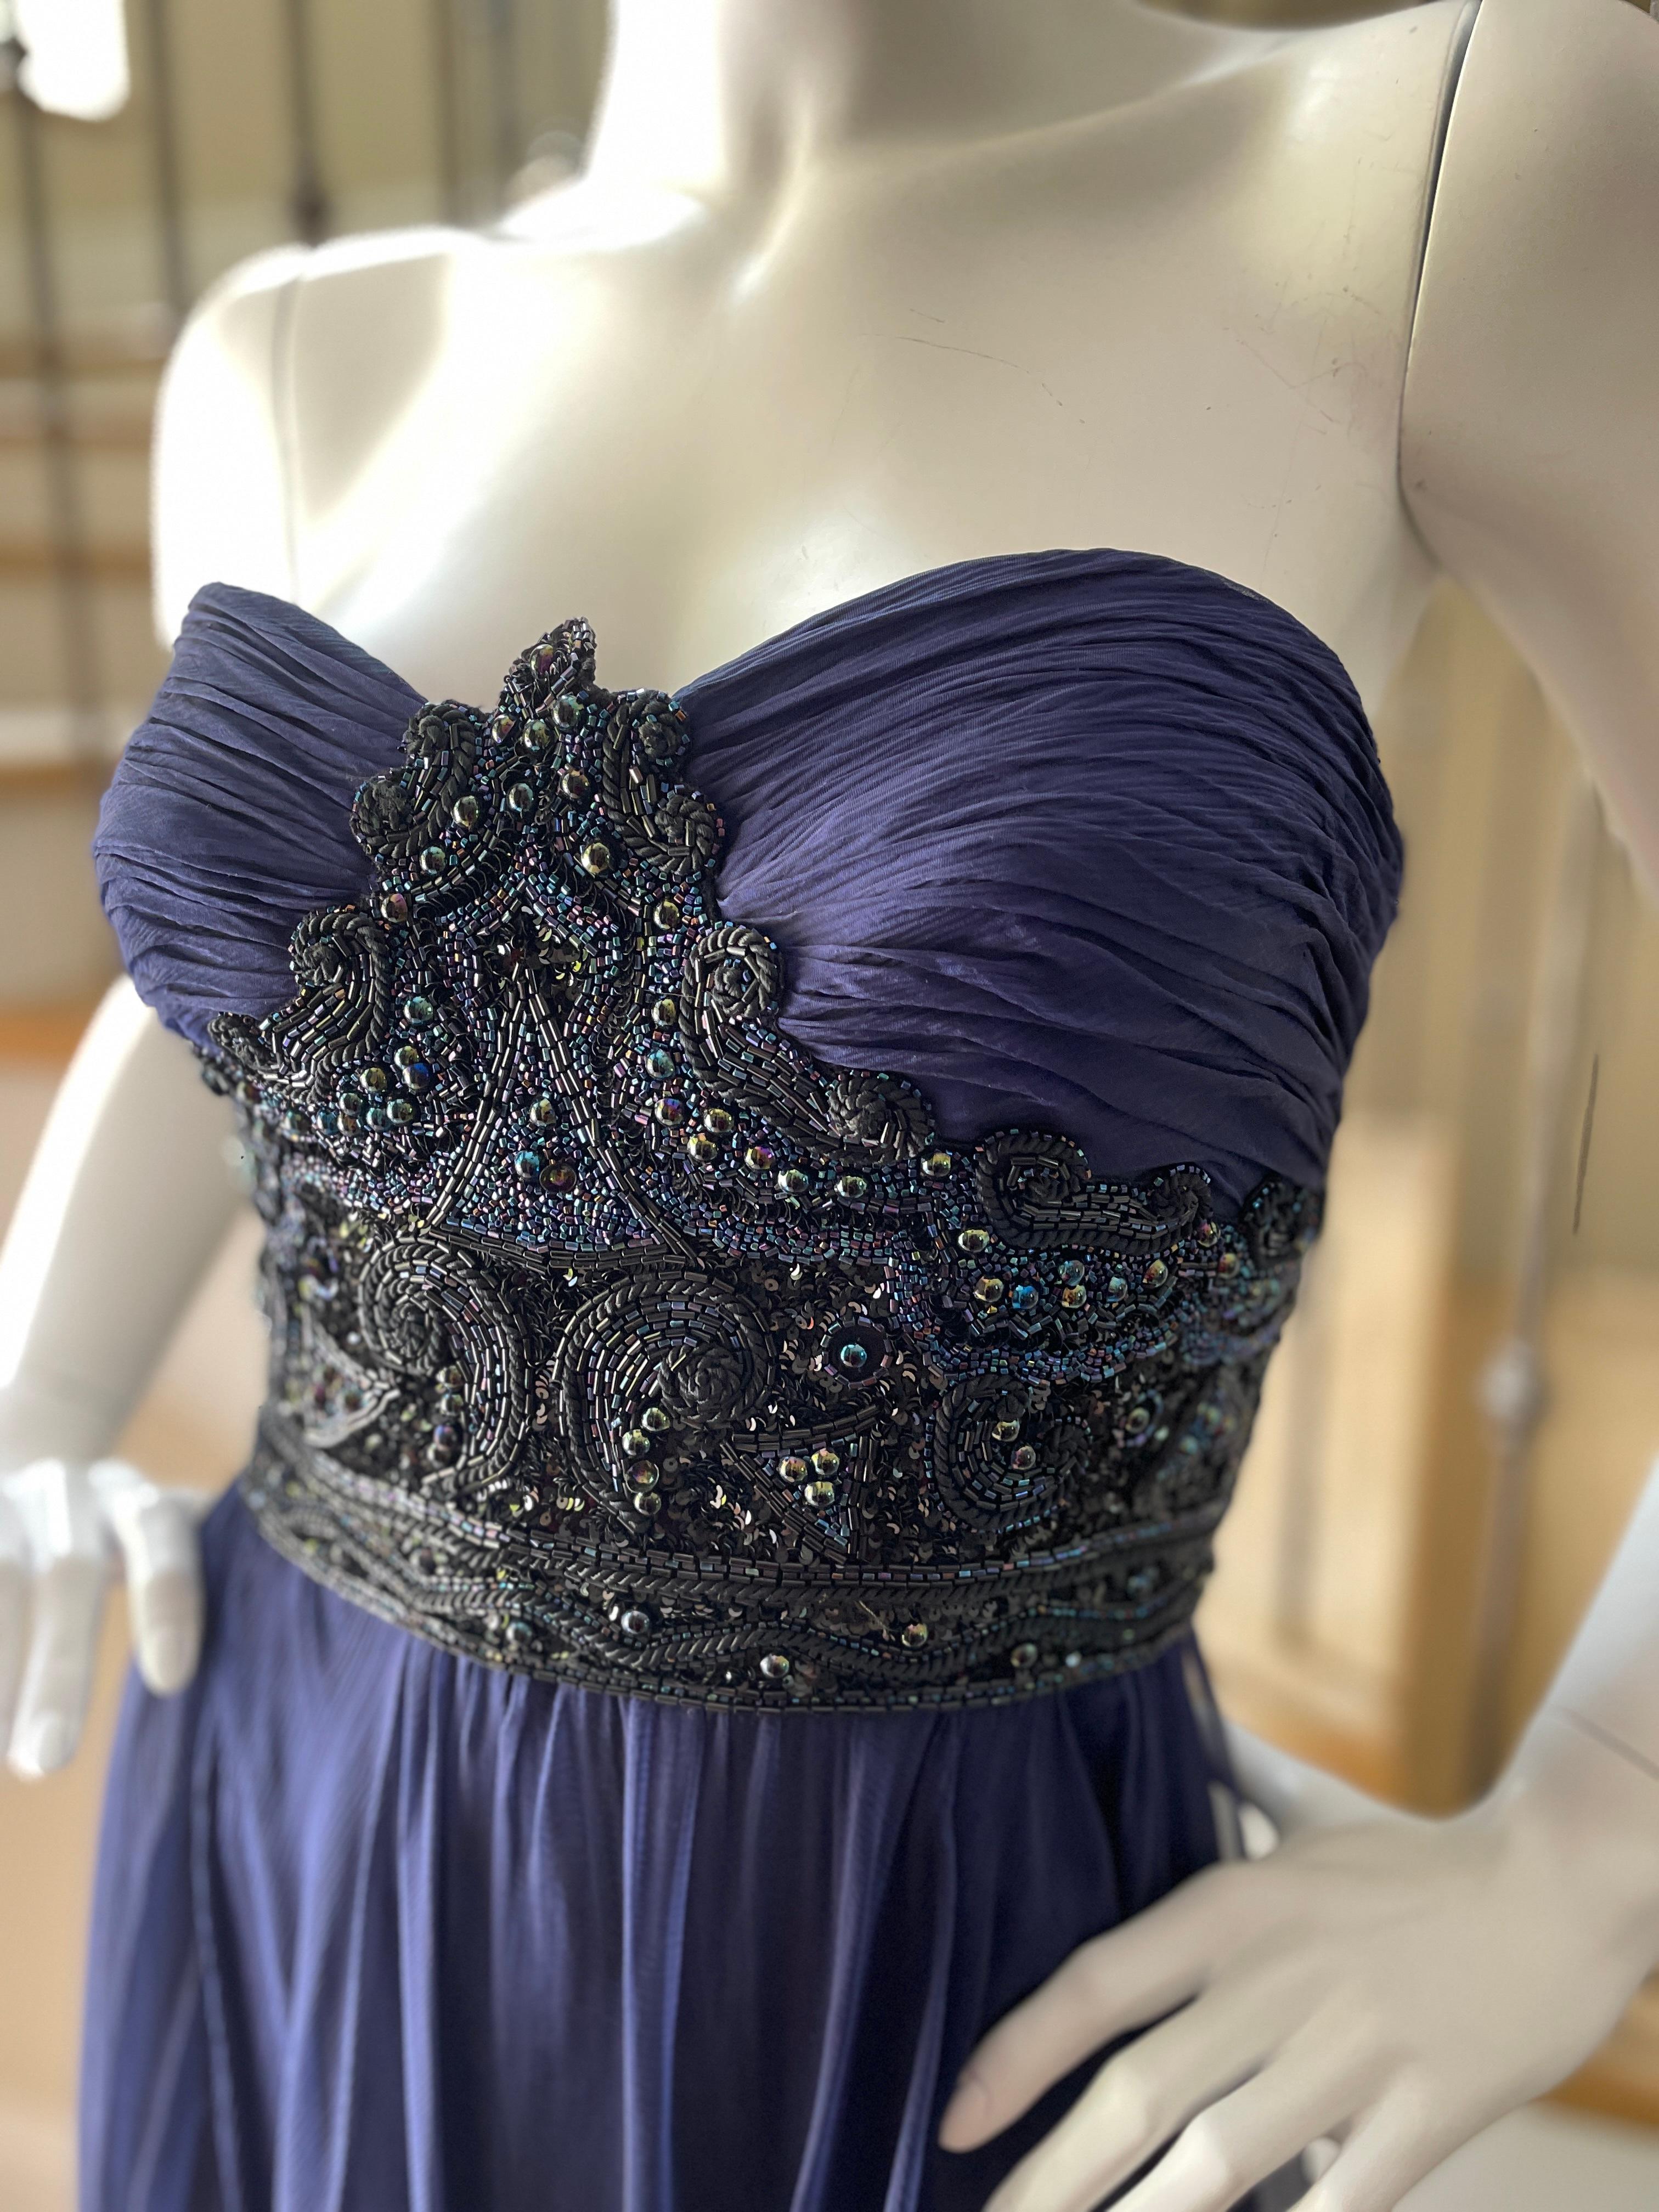 Loris Azzaro Couture 1980's Blue Sequin Evening Dress  In Good Condition For Sale In Cloverdale, CA